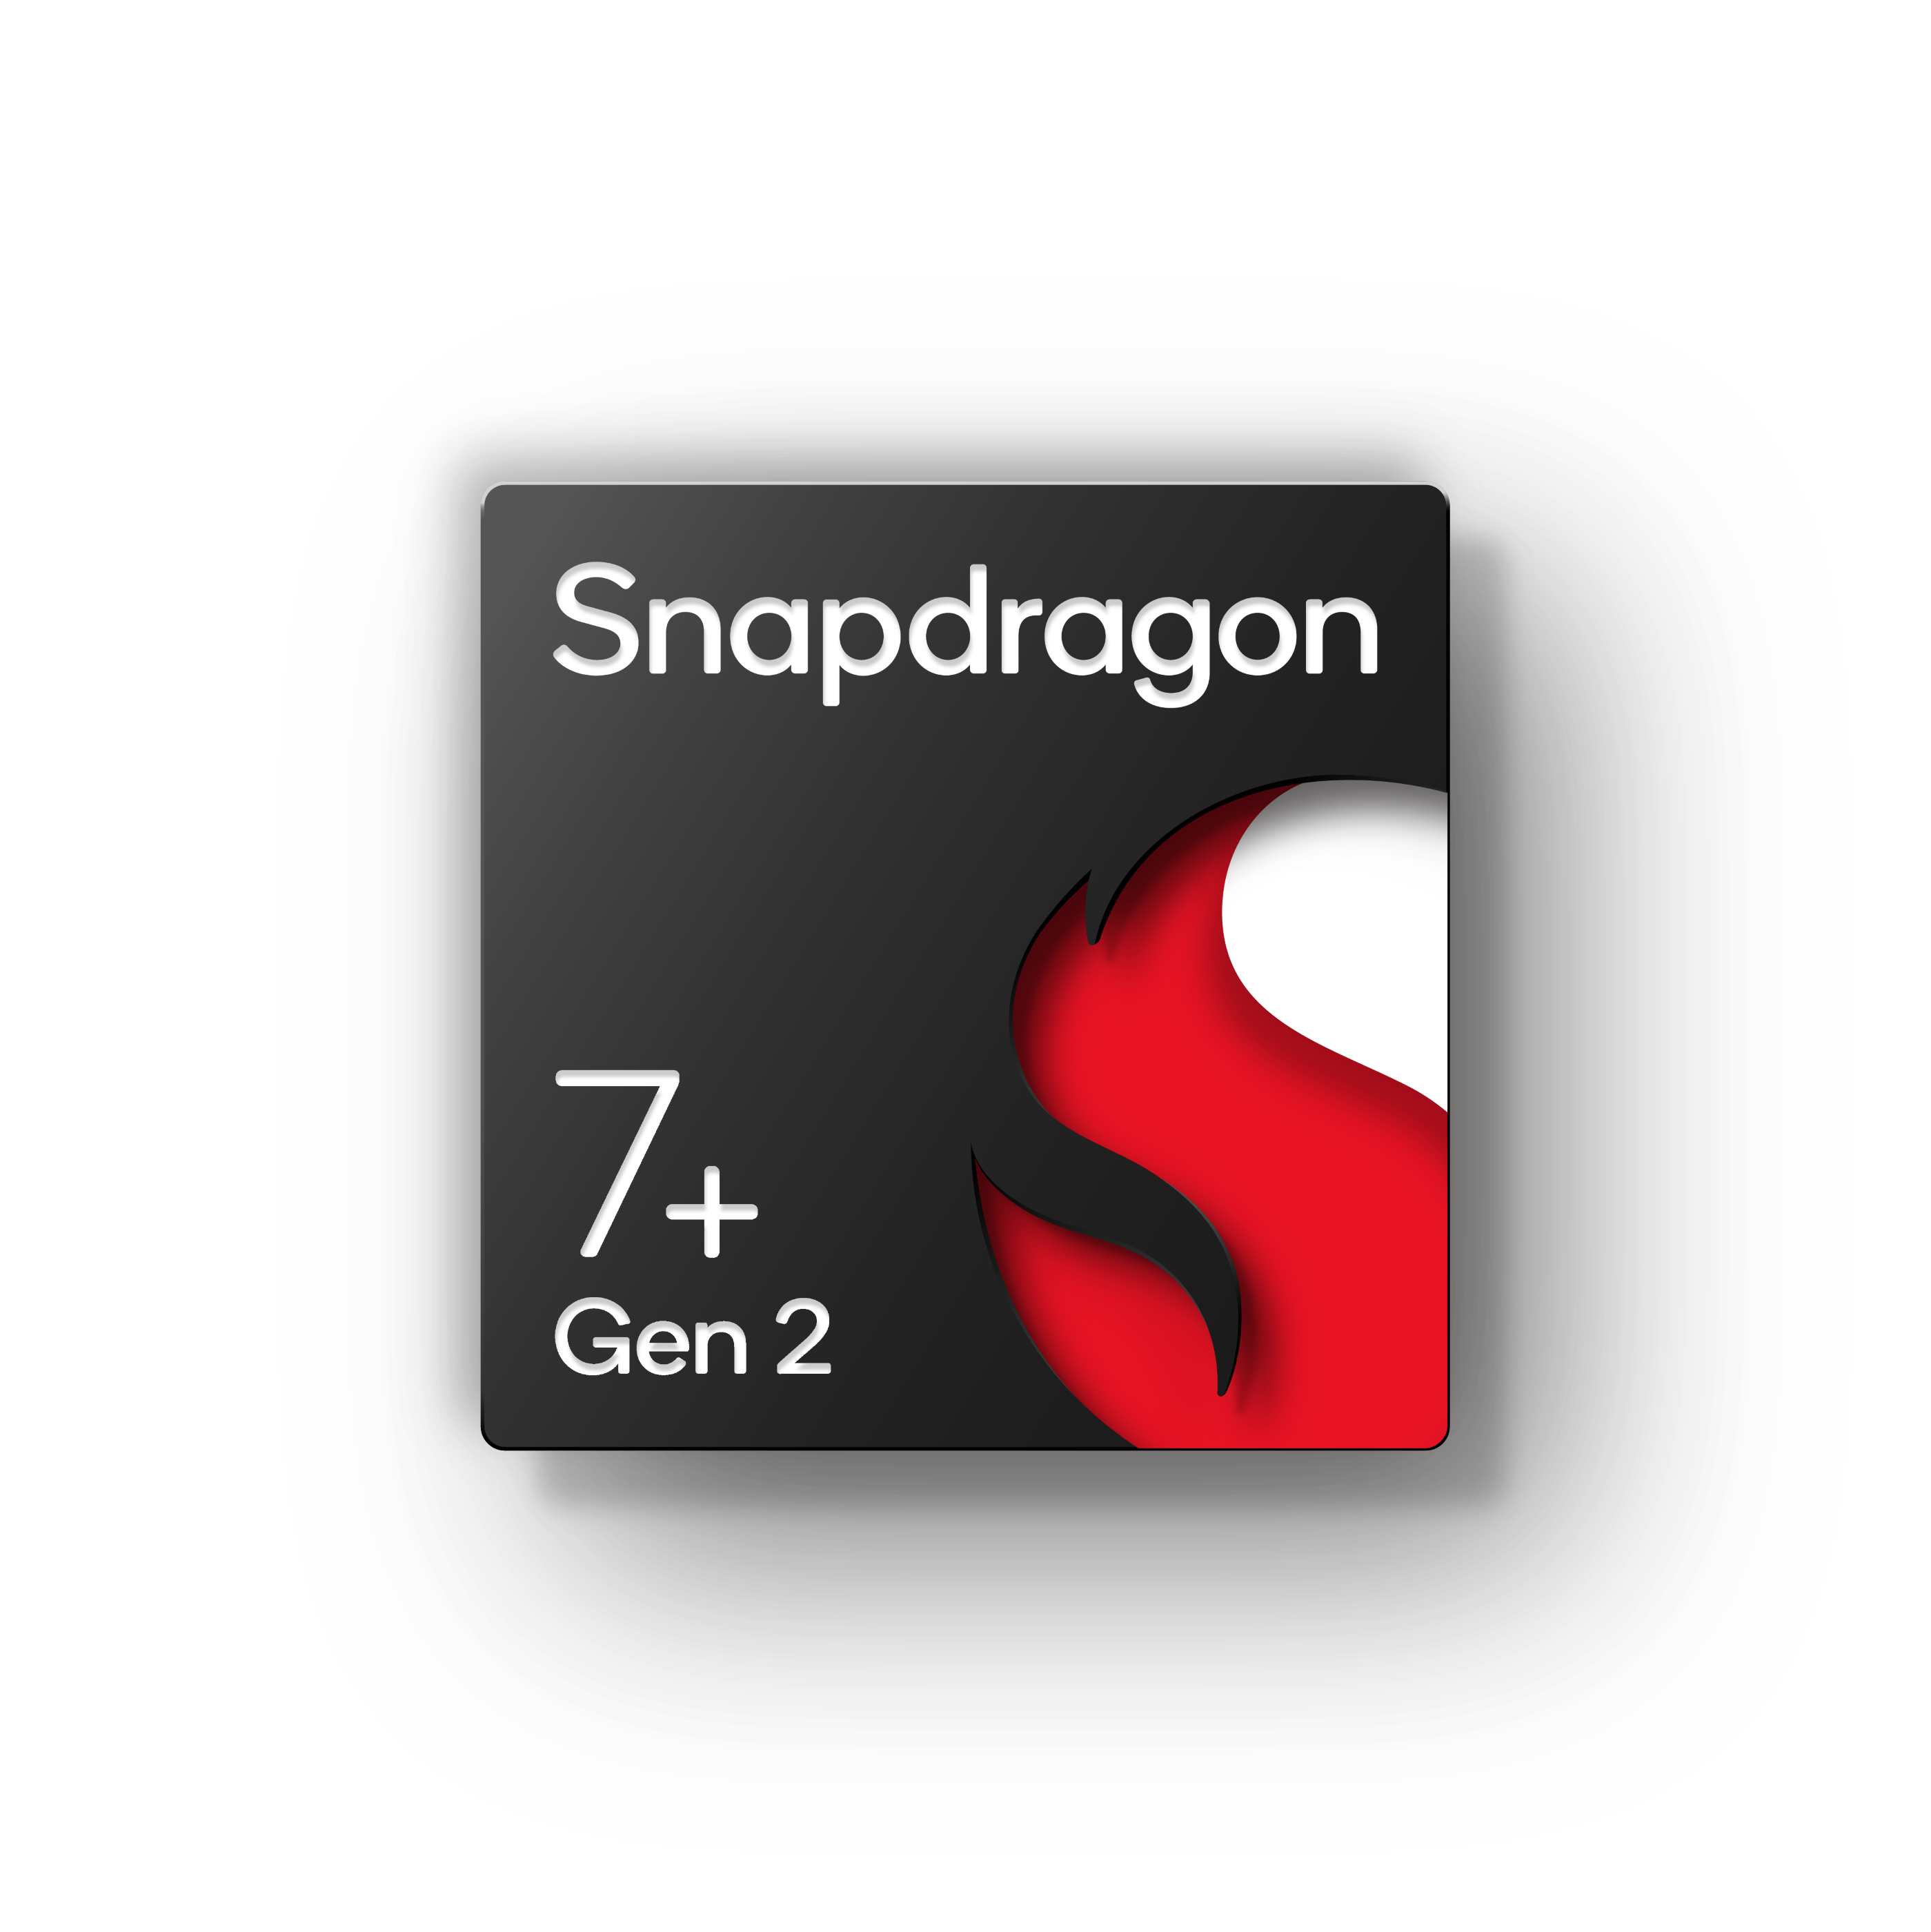 Legendary entertainment, unleashed: New Snapdragon 7+ Gen 2 is our most  powerful 7-series yet